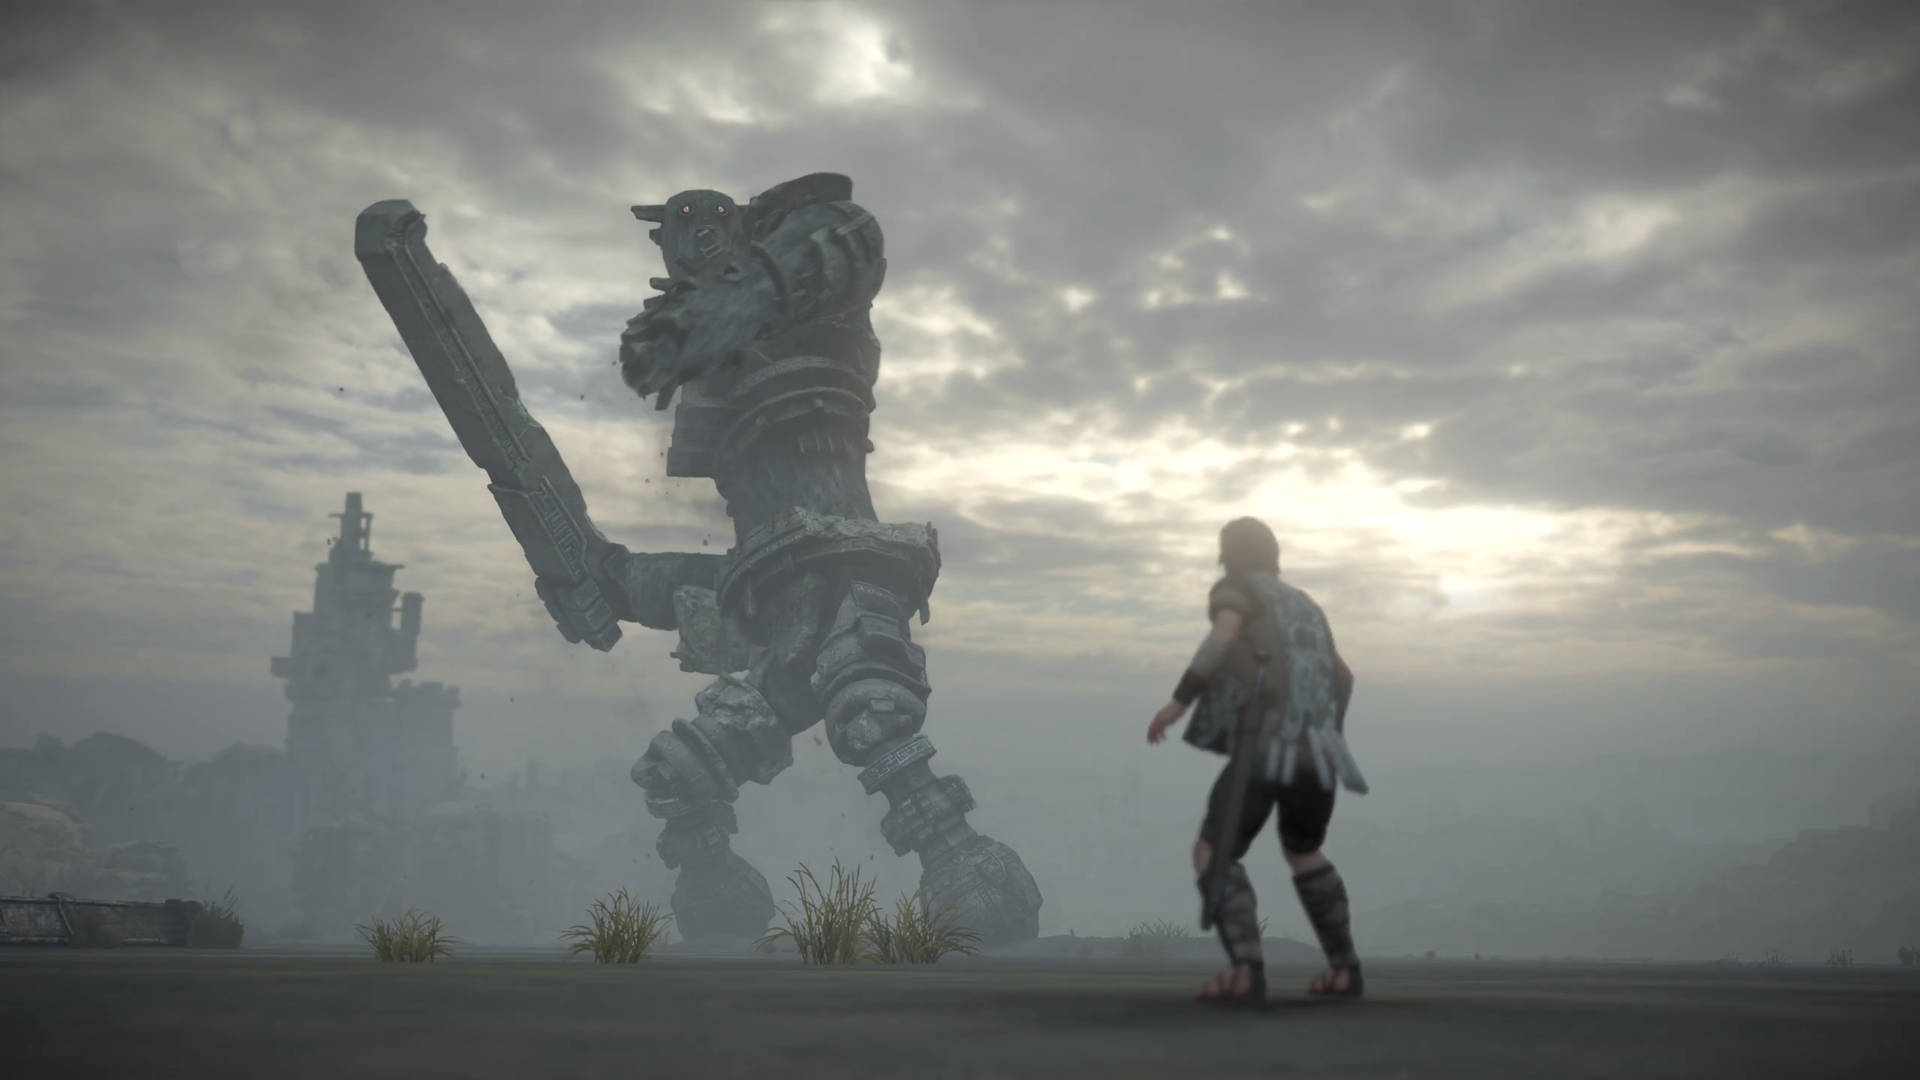 Shadow of the Colossus Steam Deck